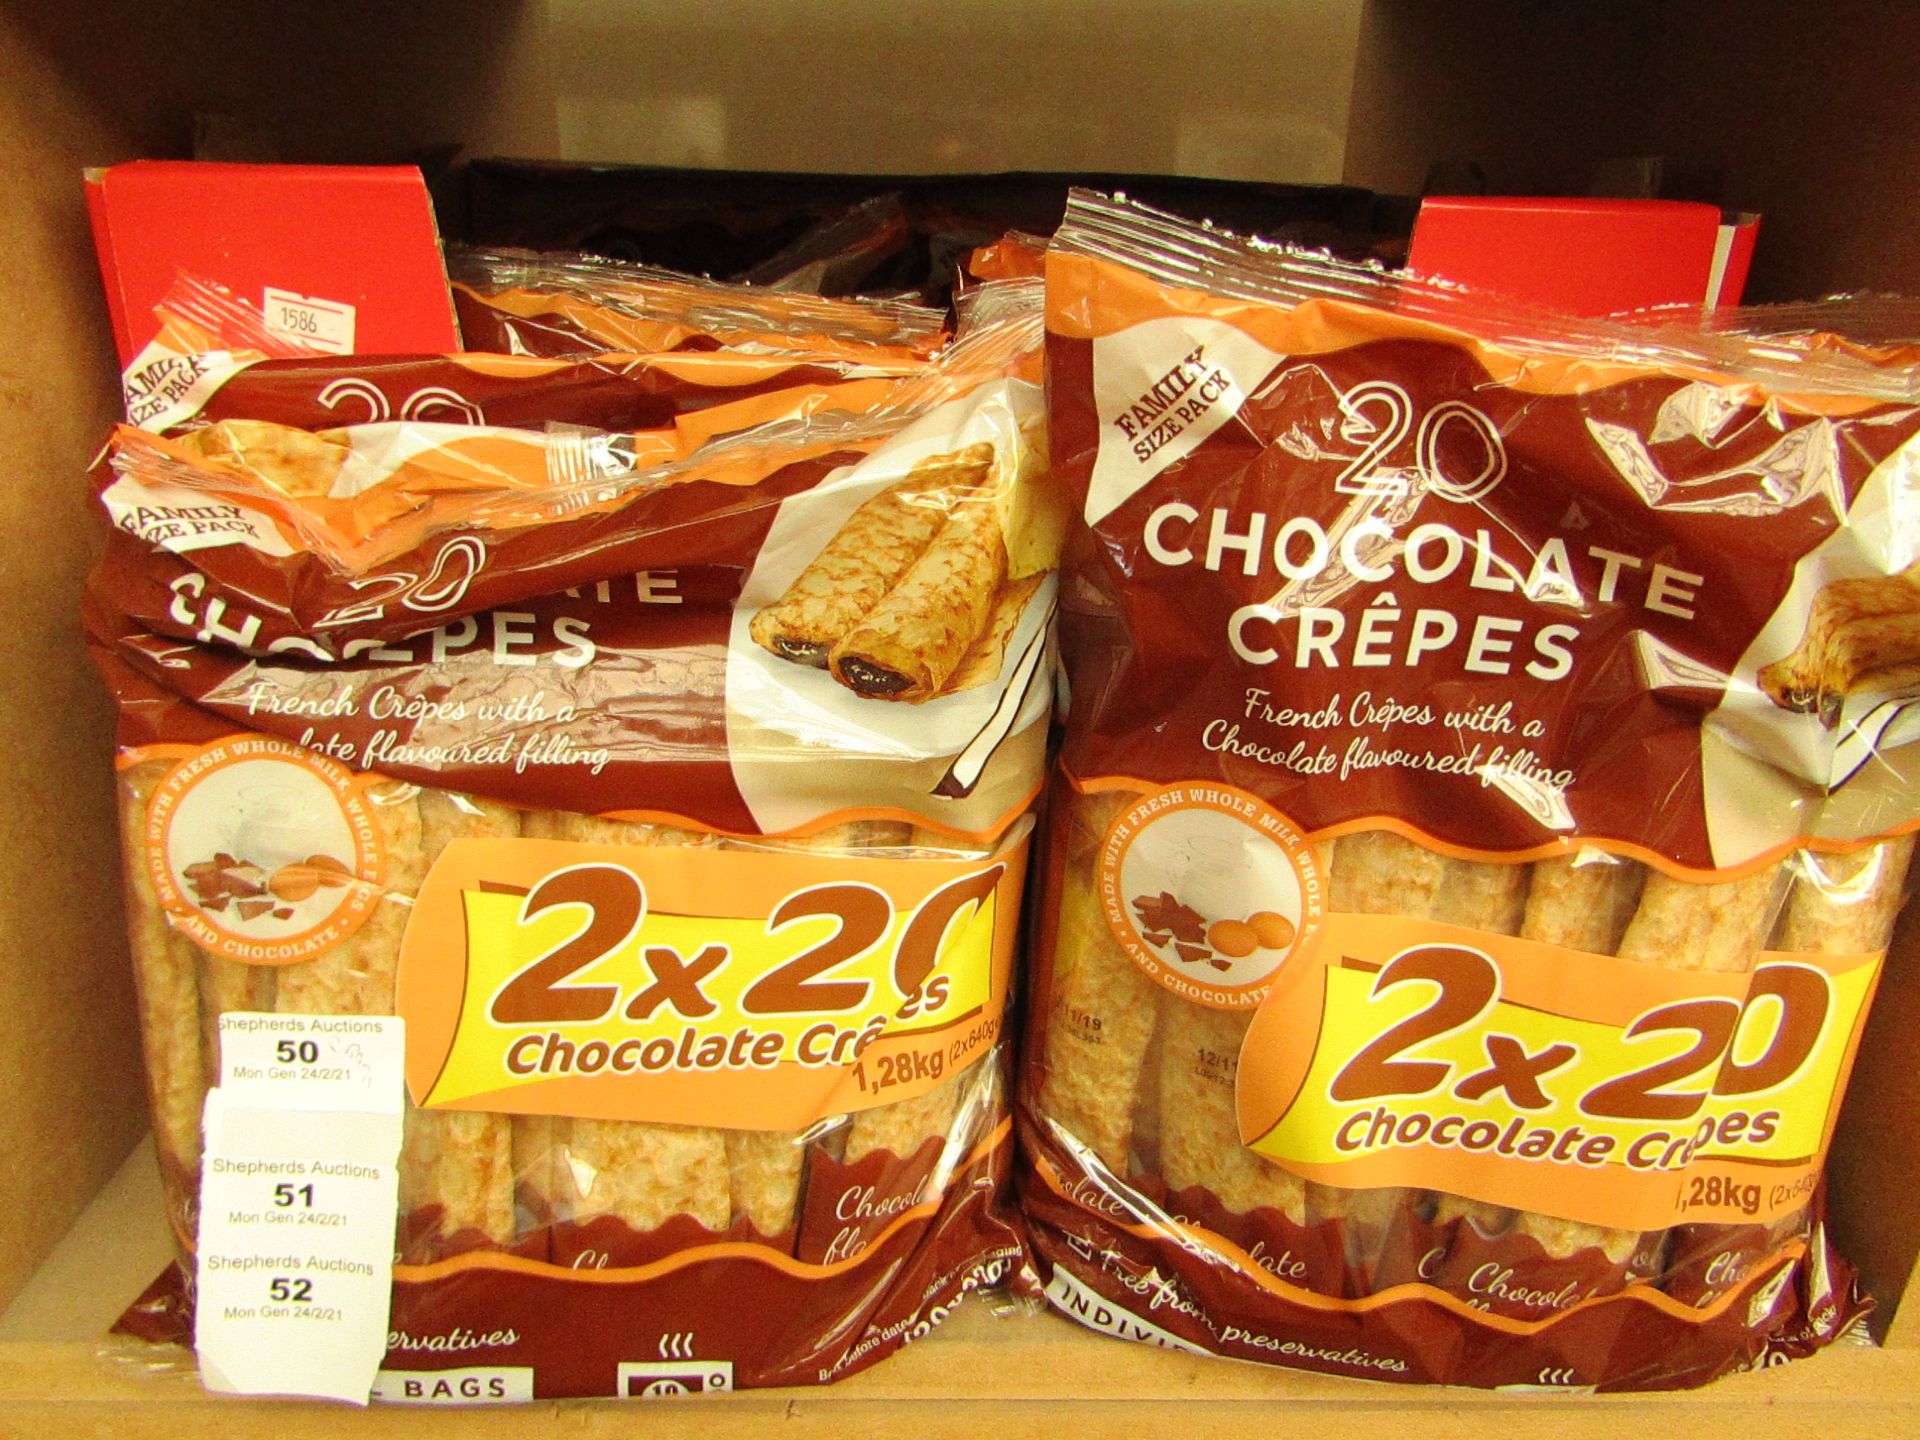 2 Packs of 20 Chocolate Crepes. BB 12/11/19